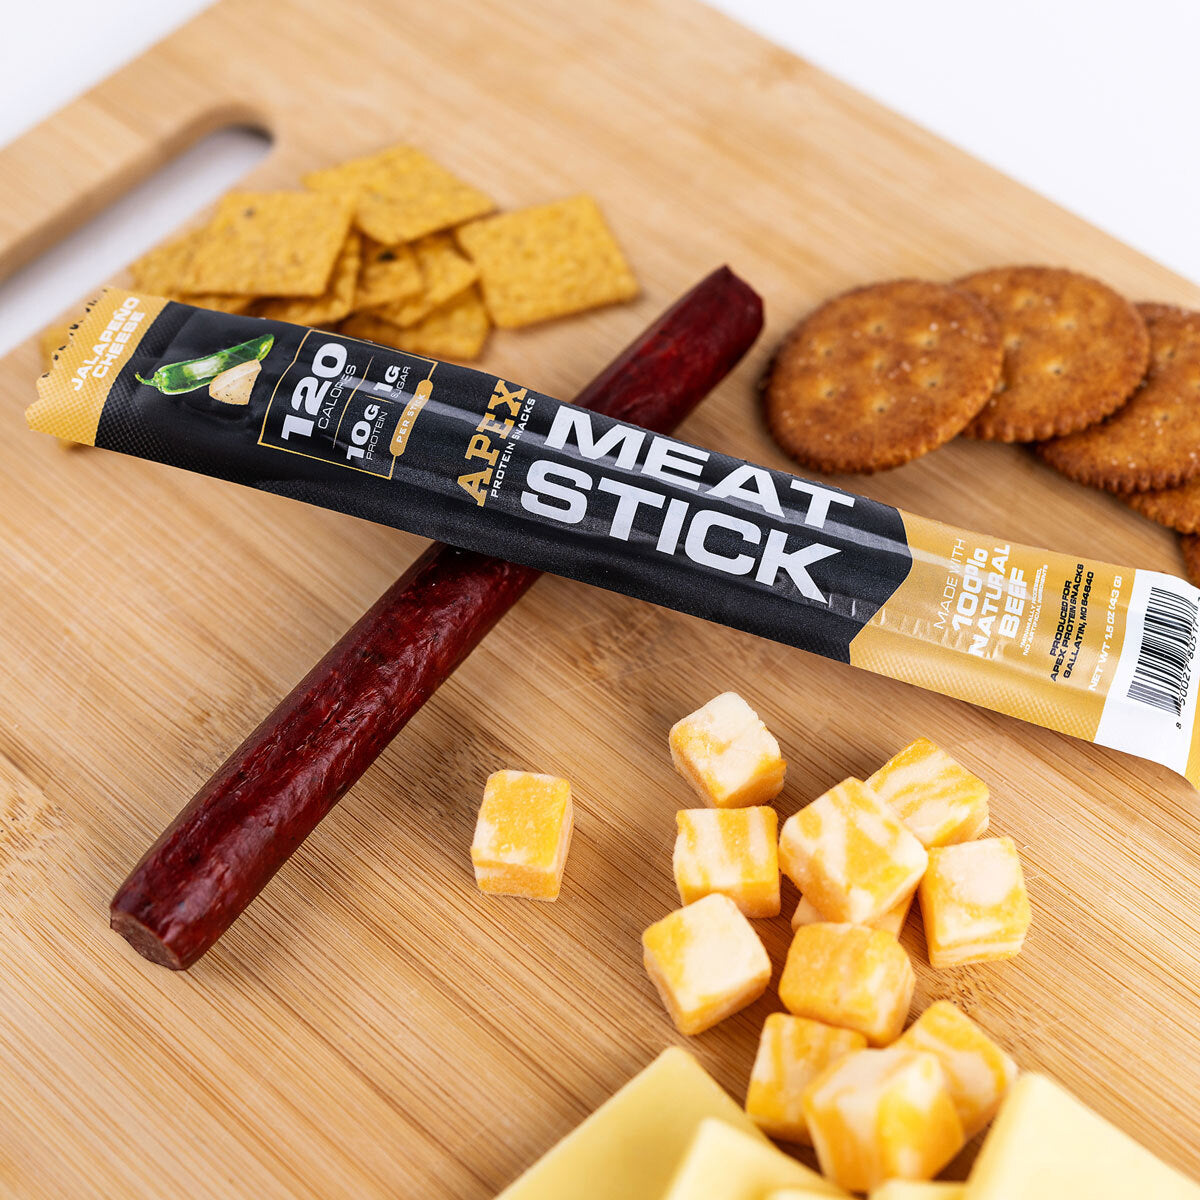 Protein Meat Sticks (12ct. Bag)